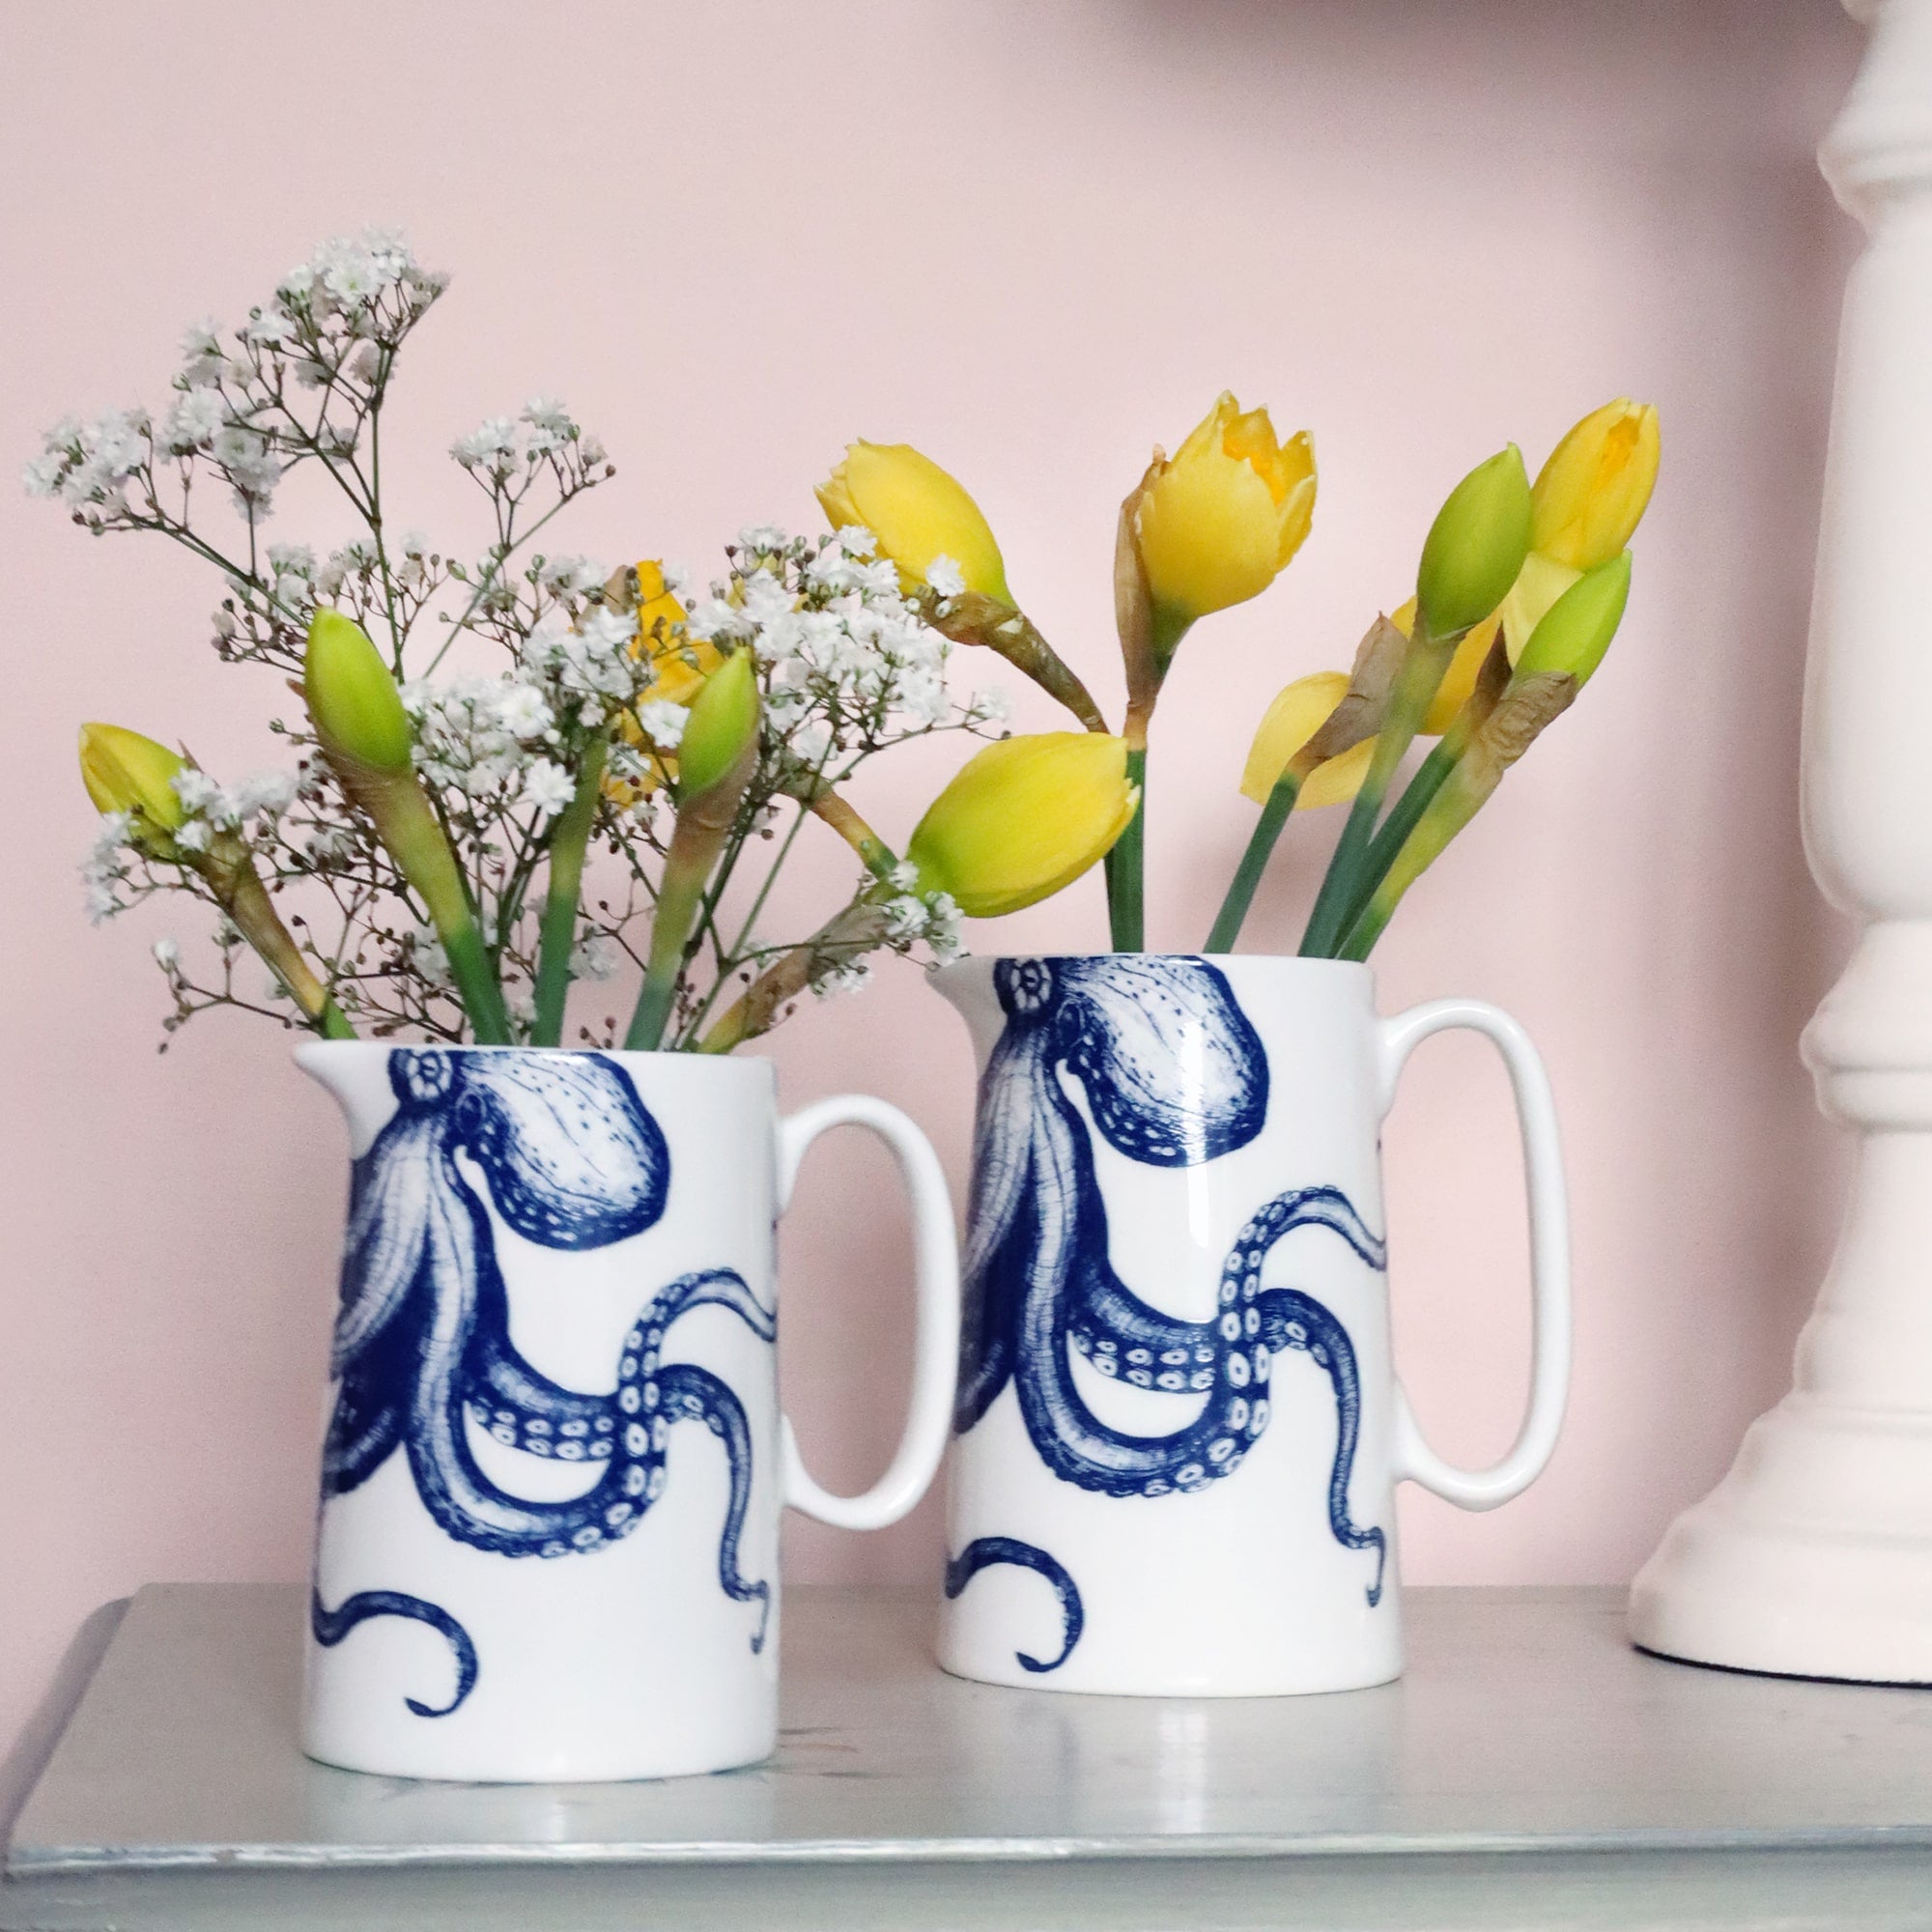 2 white jugs with a navy illustration of an octopus on them. they have yellow daffodils in them and gypsophila with a soft pink wall behind them and the edge of white lamp base just visible.